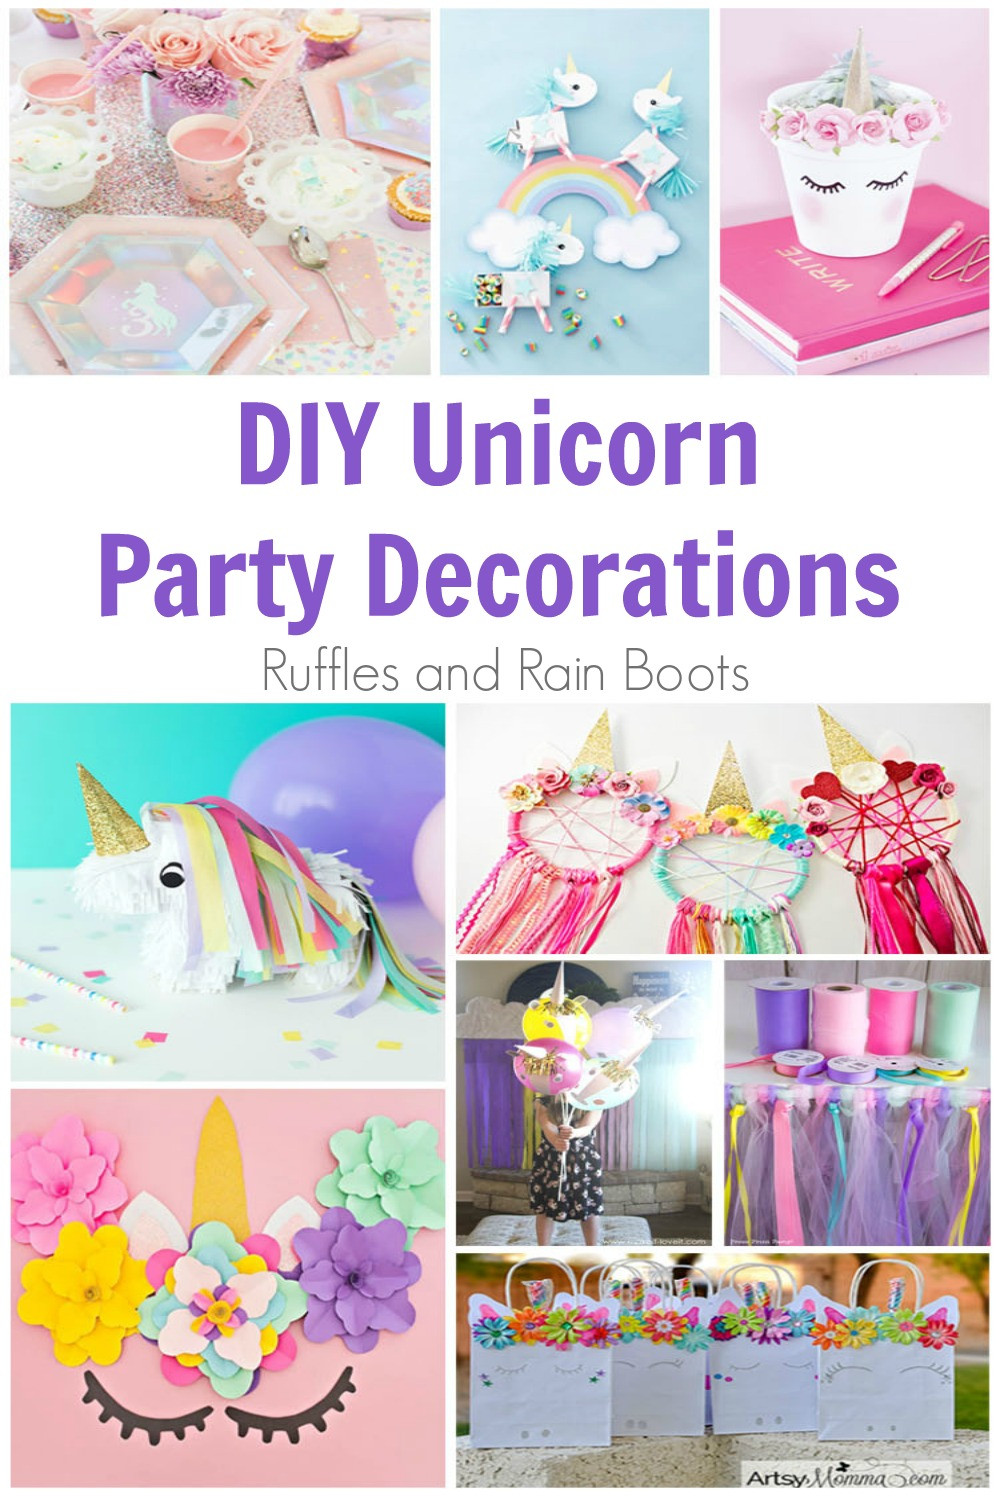 Diy Unicorn Party Ideas
 DIY Unicorn Party Decorations You Can Make Yourself